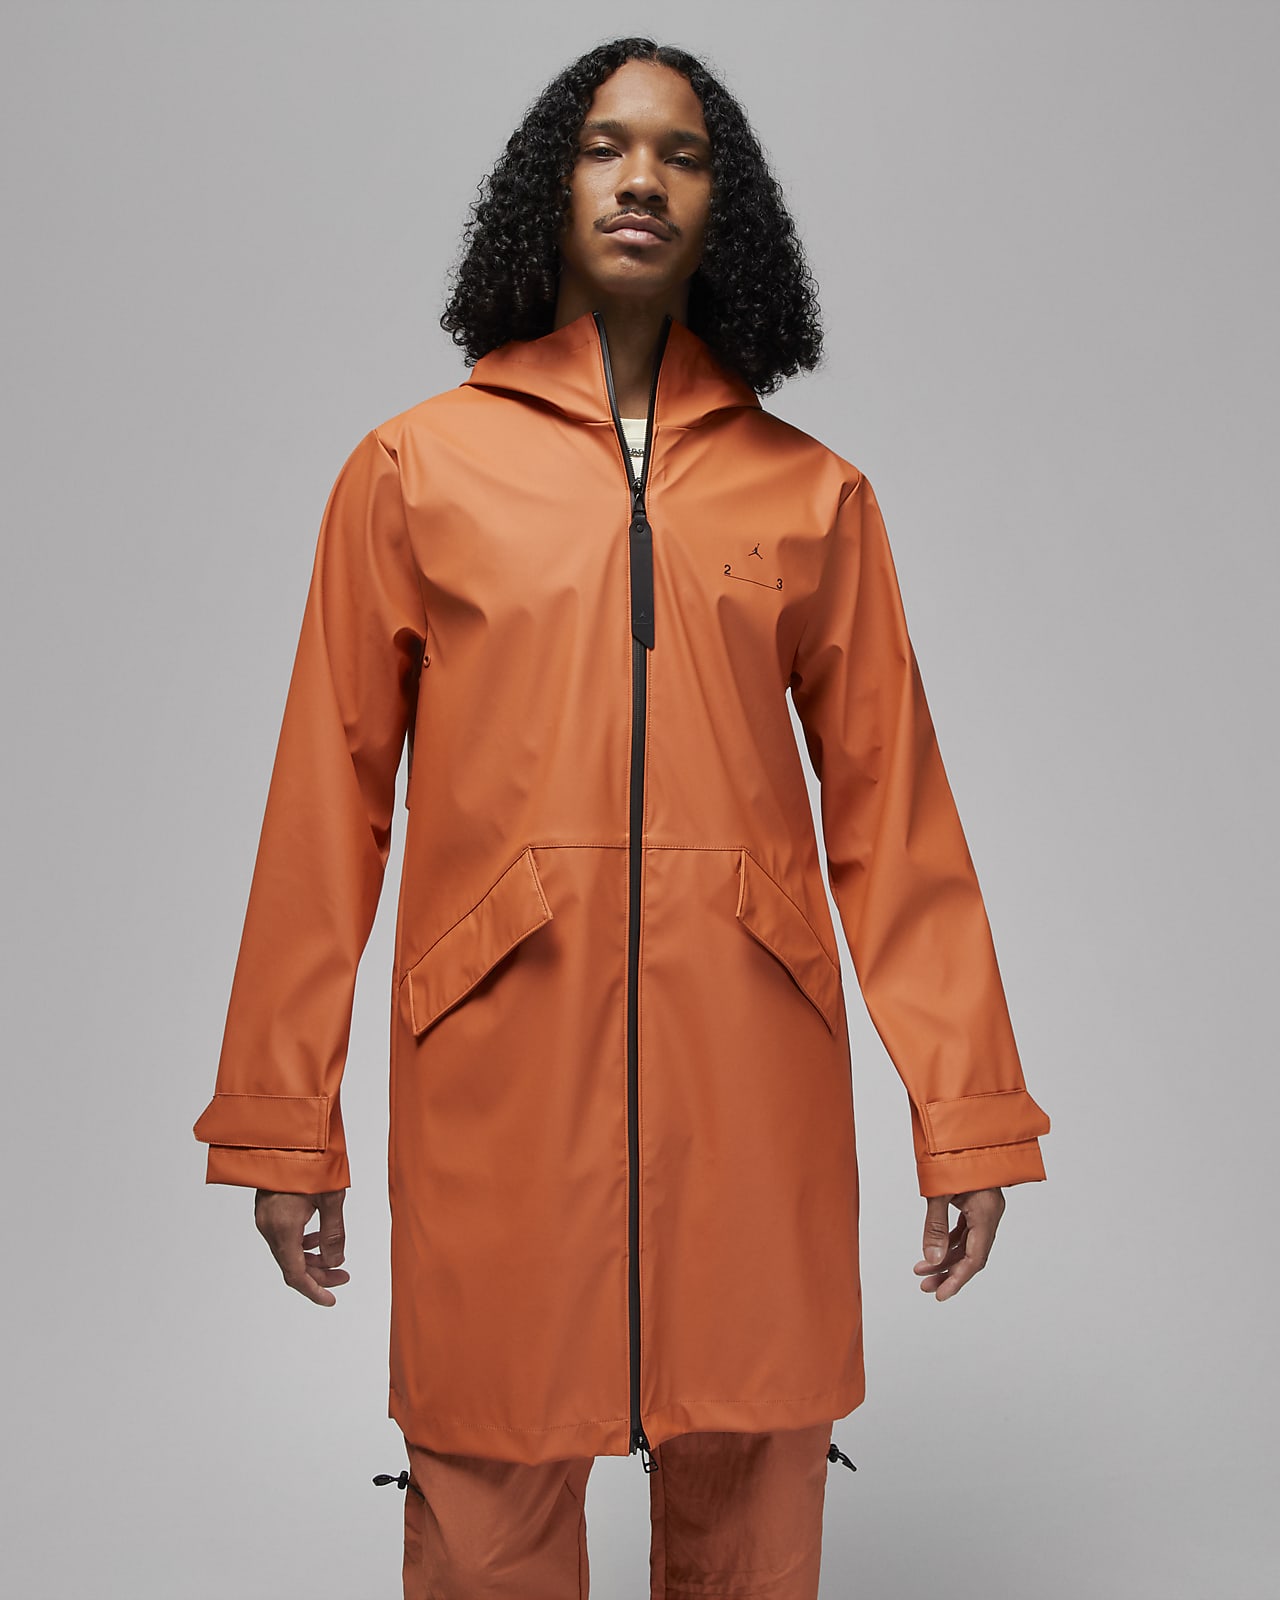 sacai Nike Trench Jacket DQ9027-010 Release Date